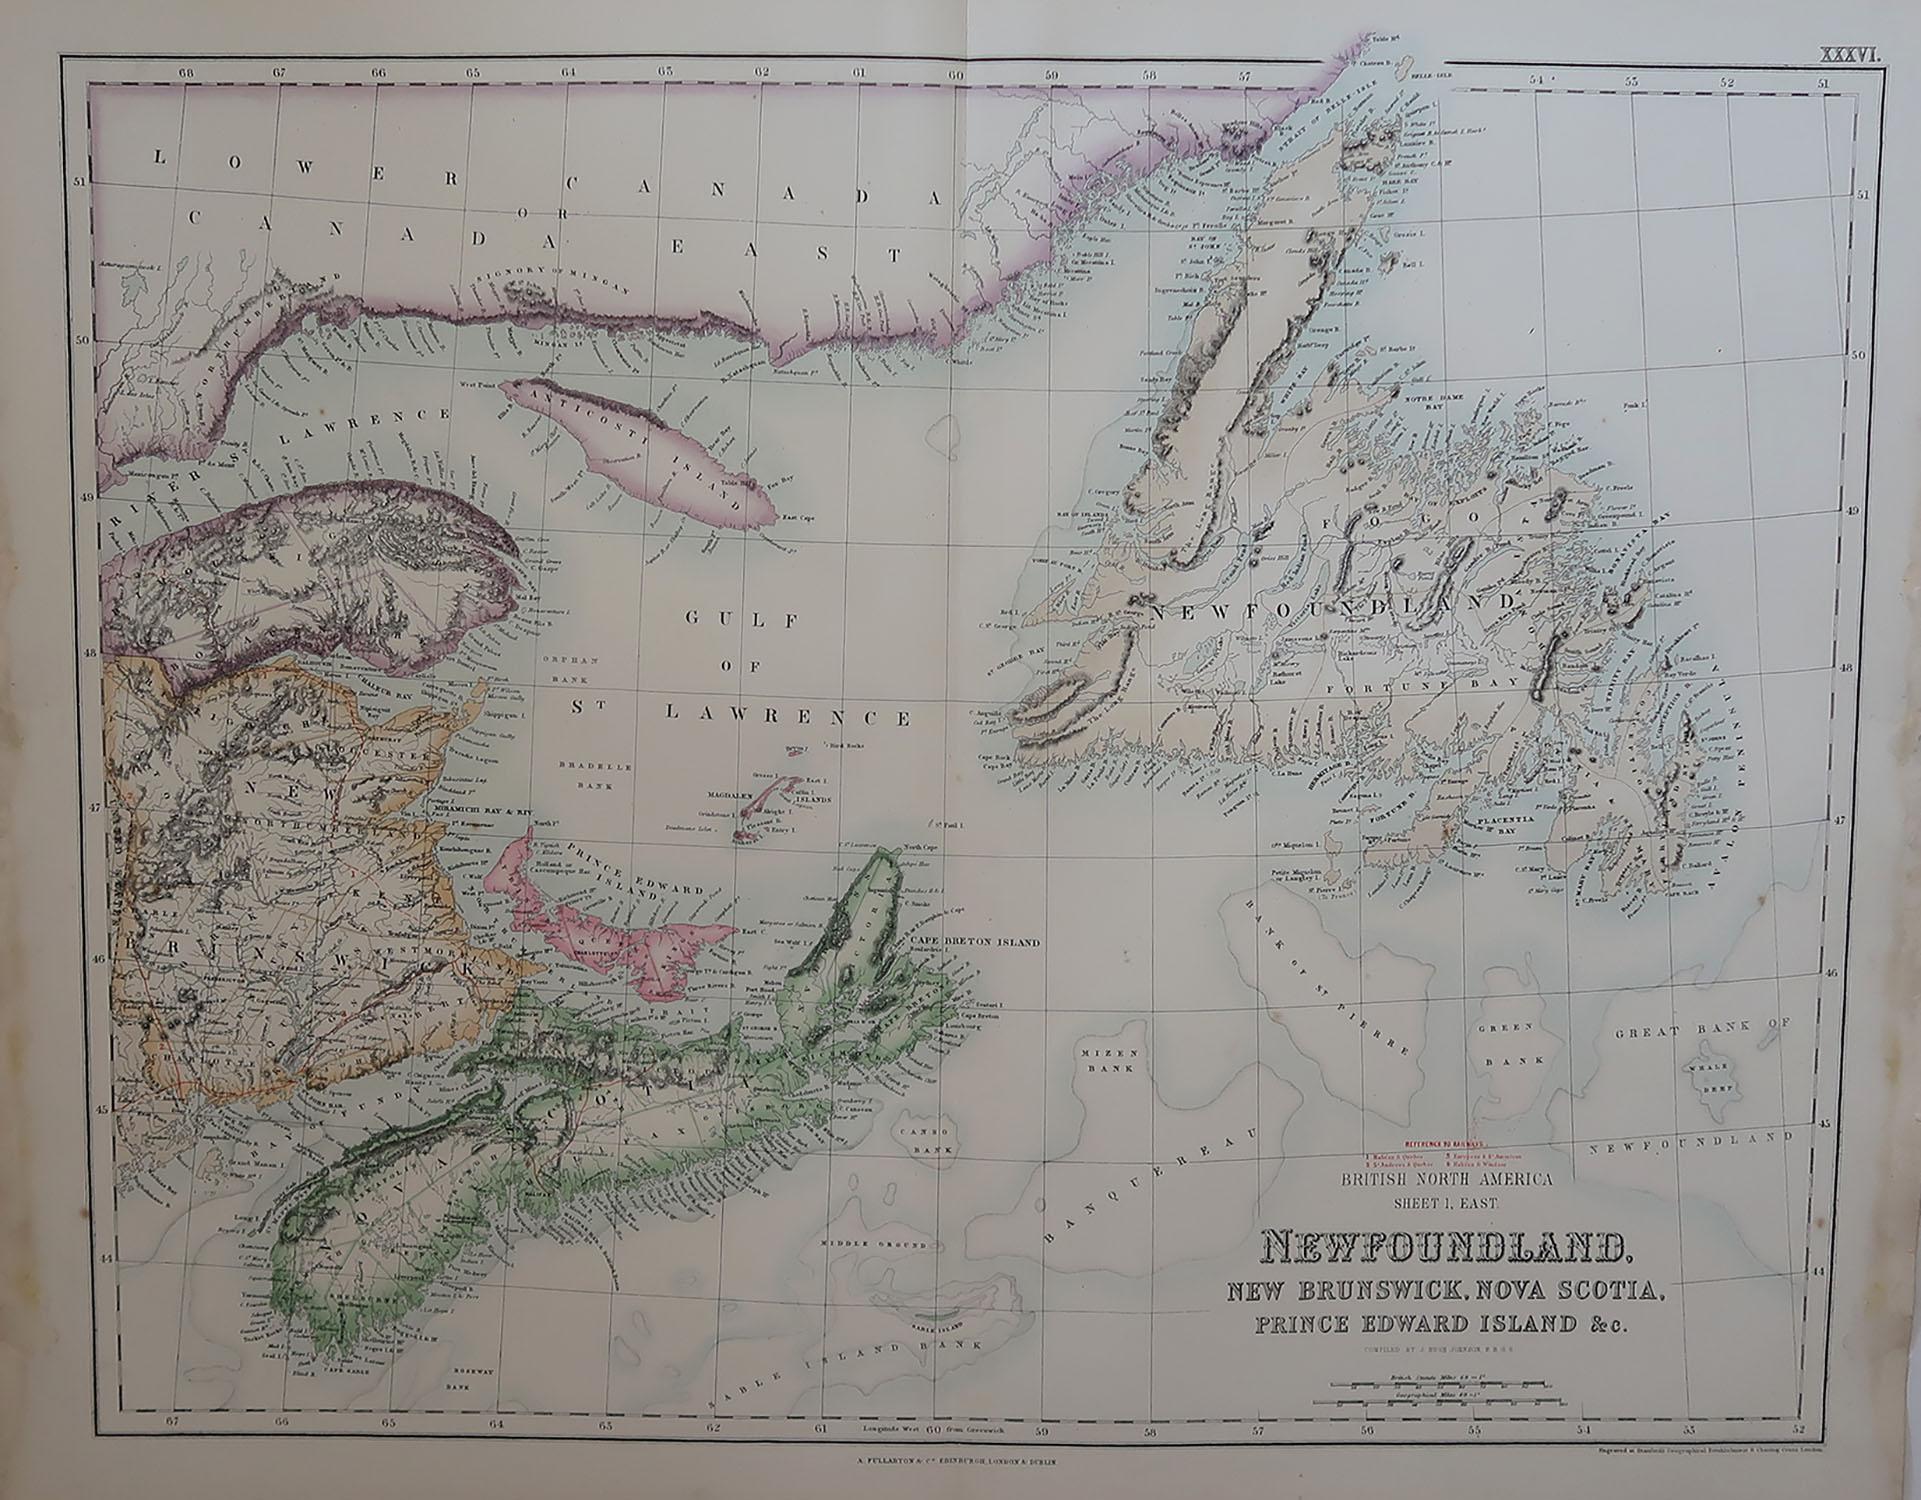 Great map of Newfoundland. Also showing Nova Scotia, New Brunswick, Prince Edward Island etc.

From the celebrated Royal Illustrated Atlas

Lithograph by Swanston. Original color. 

Published by Fullarton, Edinburgh. C.1870

Repairs to minor